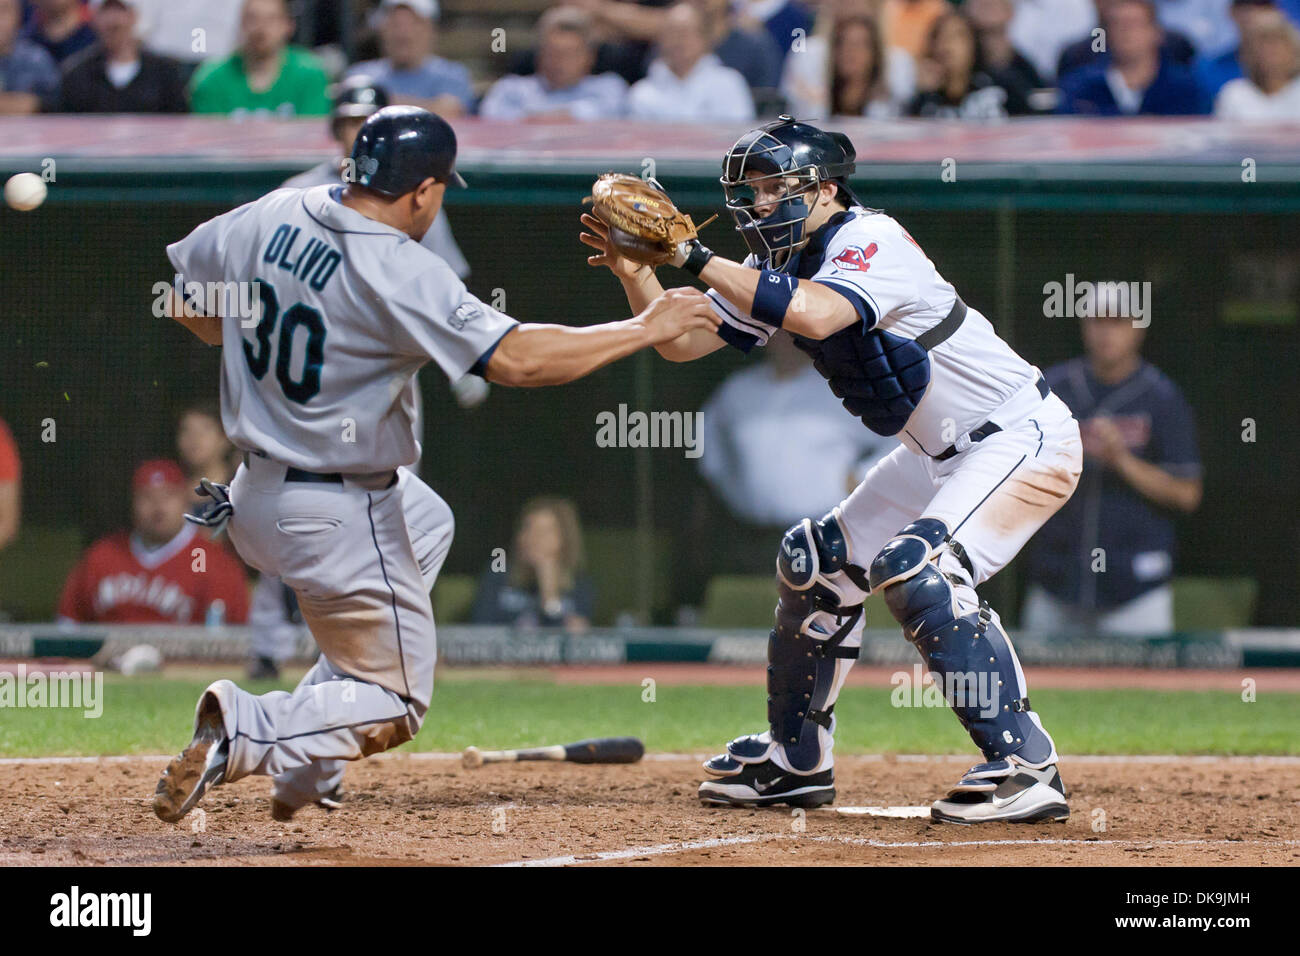 Aug. 22, 2011 - Cleveland, Ohio, U.S - Seattle catcher Miguel Olivo (30) slides in to home as Cleveland catcher Lou Marson (6) waits for the throw during the ninth inning.  Olivo was called safe as the Seattle Mariners defeated the Cleveland Indians 3-2 at Progressive Field in Cleveland, Ohio. (Credit Image: © Frank Jansky/Southcreek Global/ZUMAPRESS.com) Stock Photo